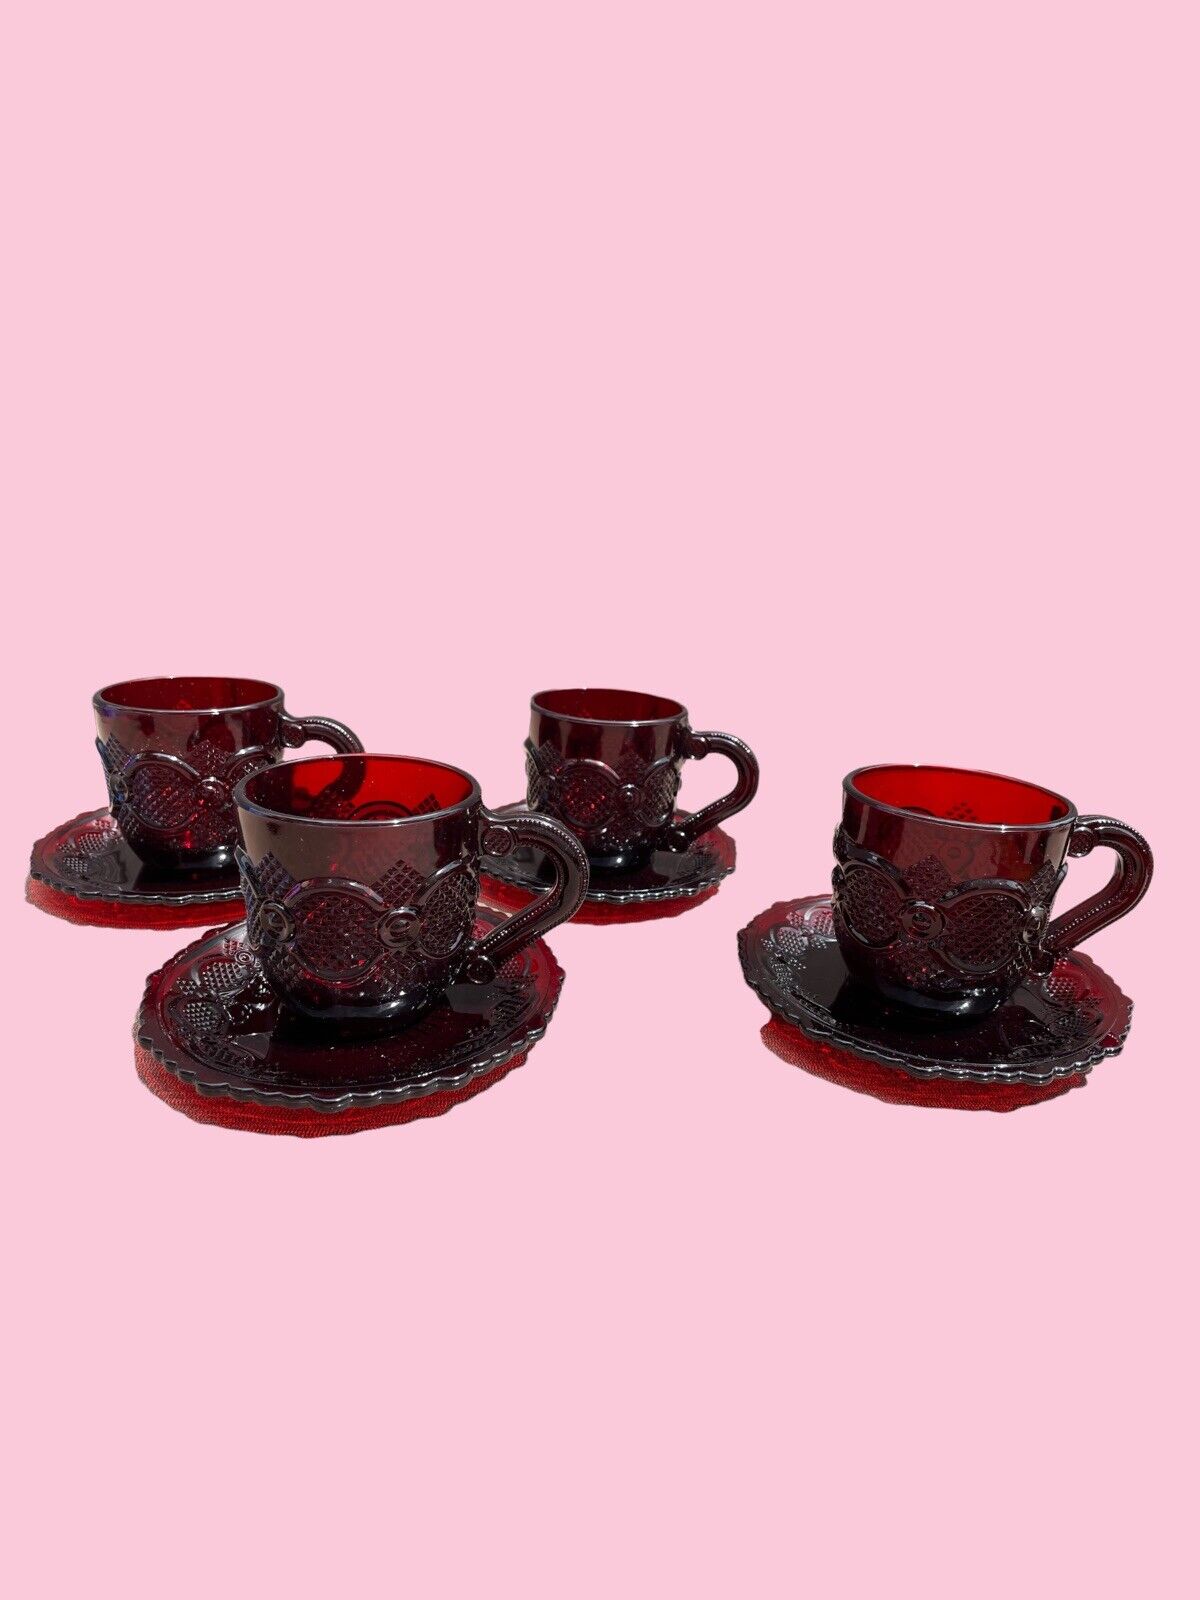 Avon Ruby Red Cape Cod 1876 Collection Vintage (4) Coffee Cup With Saucers